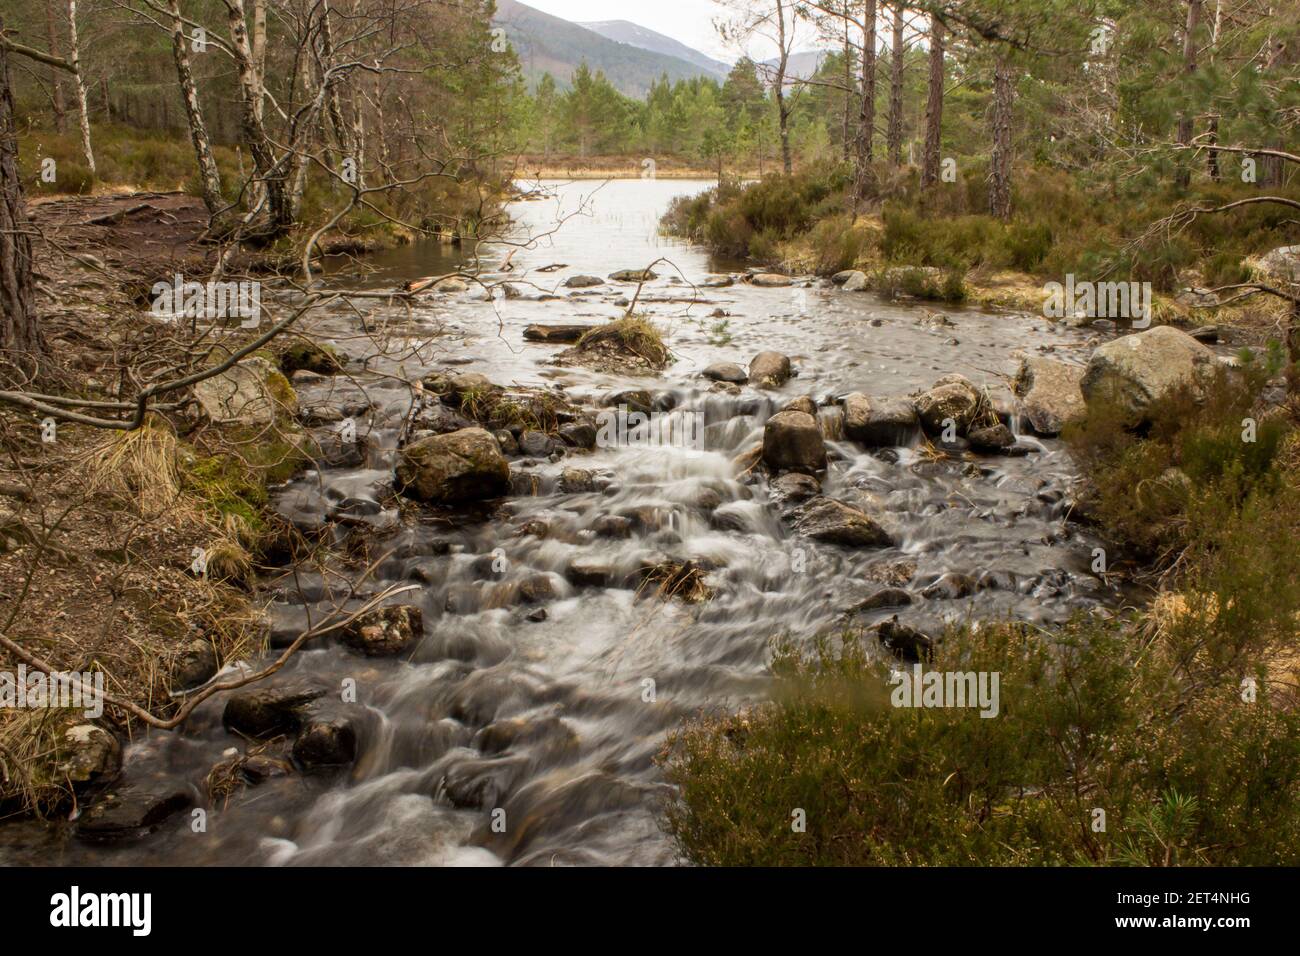 The small stream connecting Loch an Eilean and the smaller Loch Gamha, in the Rothiemurchus forest in the Cairngorms National Park Stock Photo